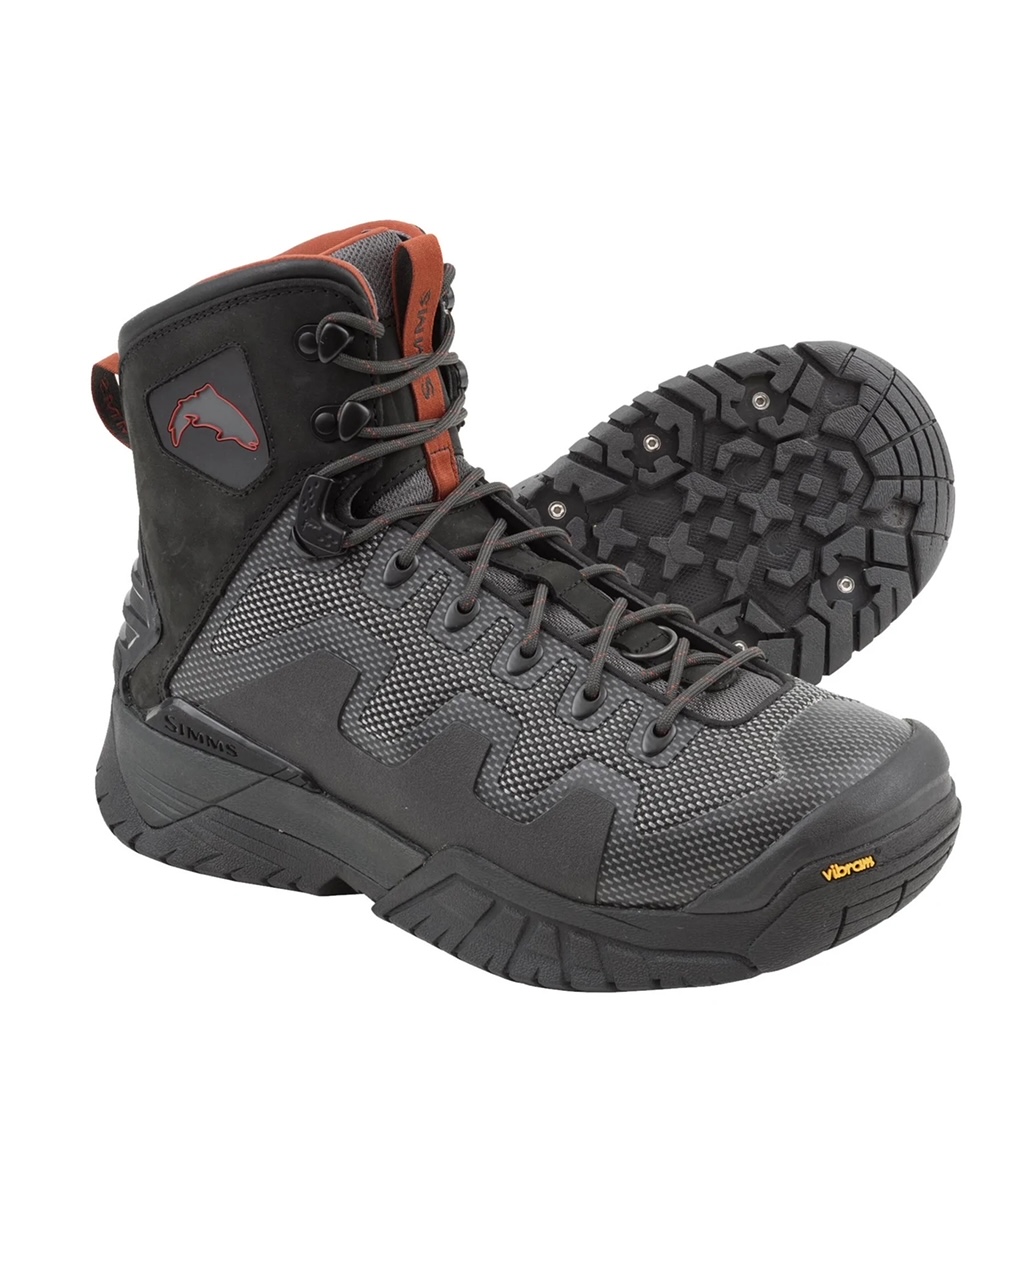 G4 PRO Wading Boot (CLEARANCE)